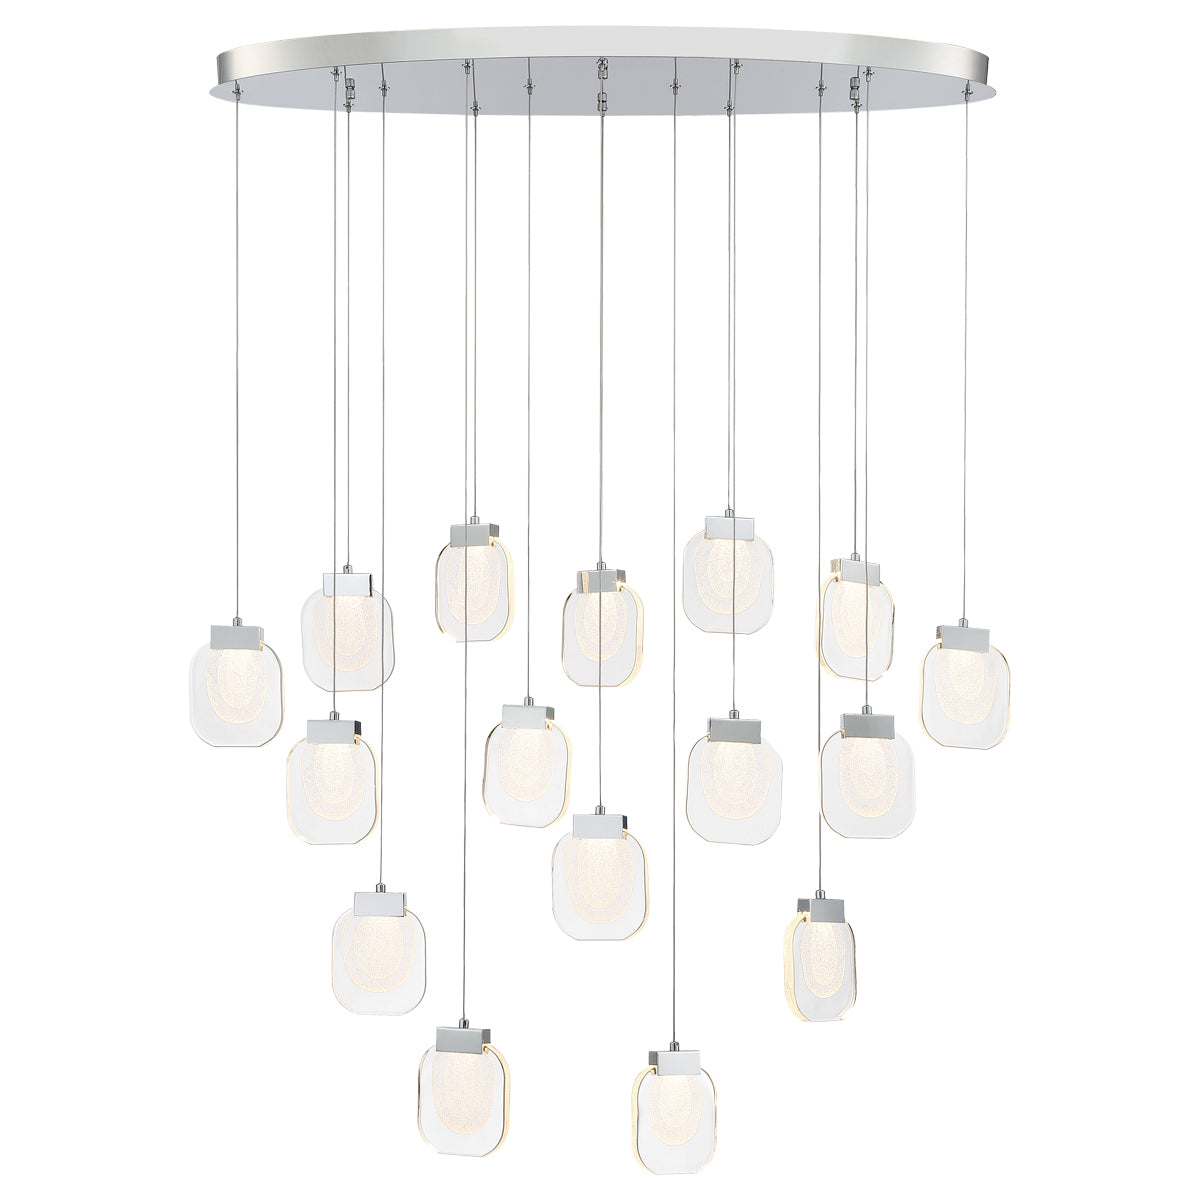 PAGET Chandelier Chrome - 37194-027 | EUROFASE